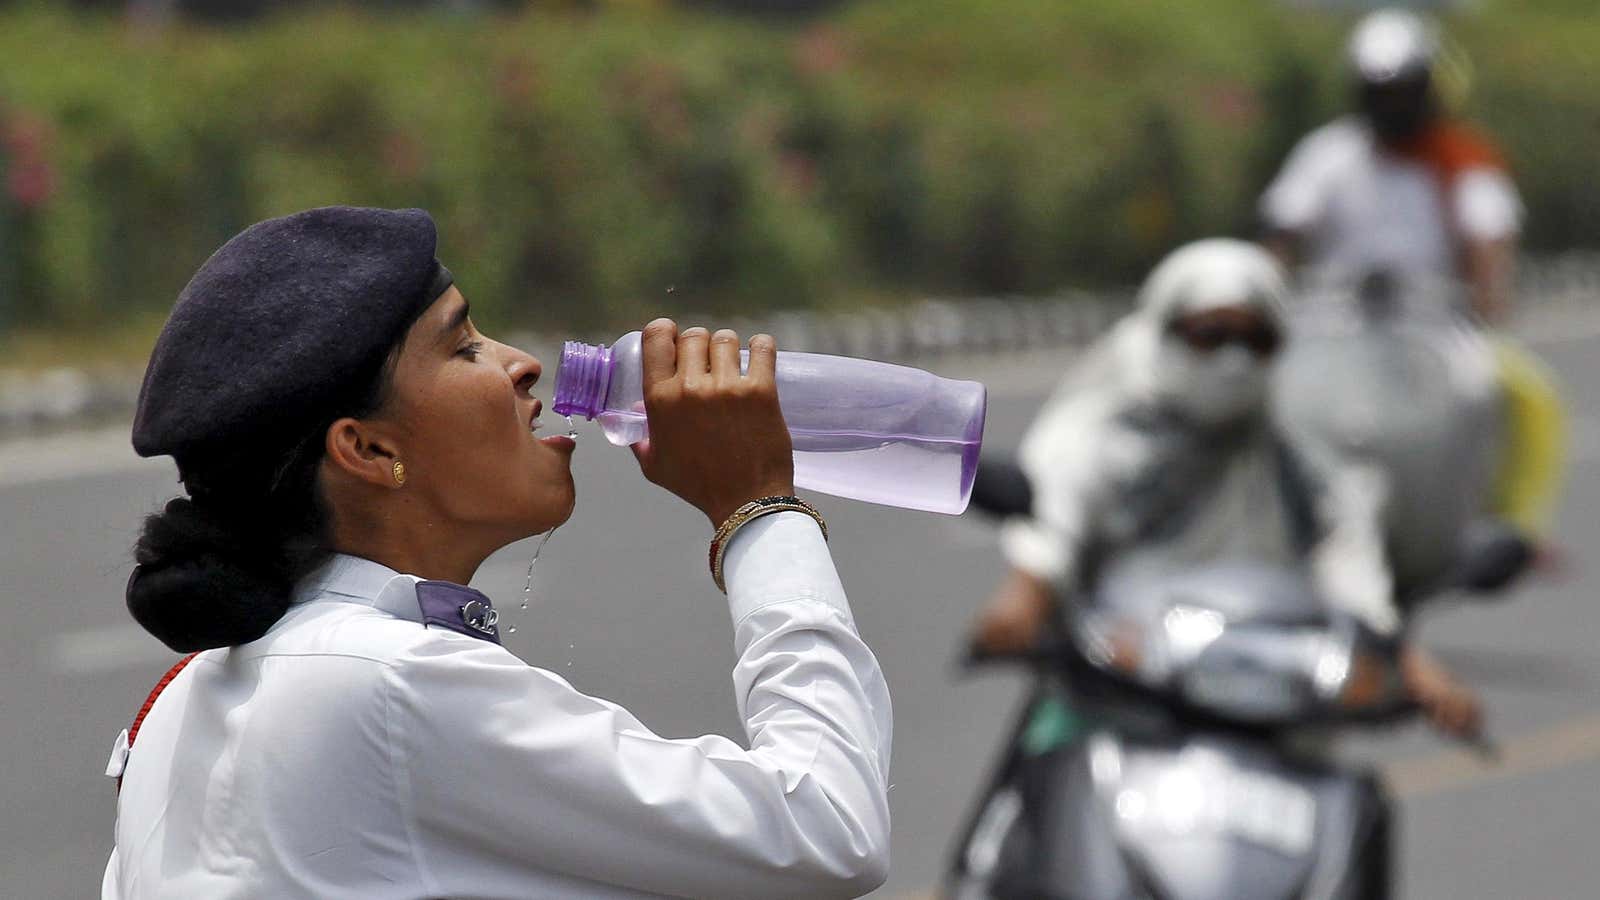 Rising temperatures are pushing India towards the deadly "wet bulb" threshold